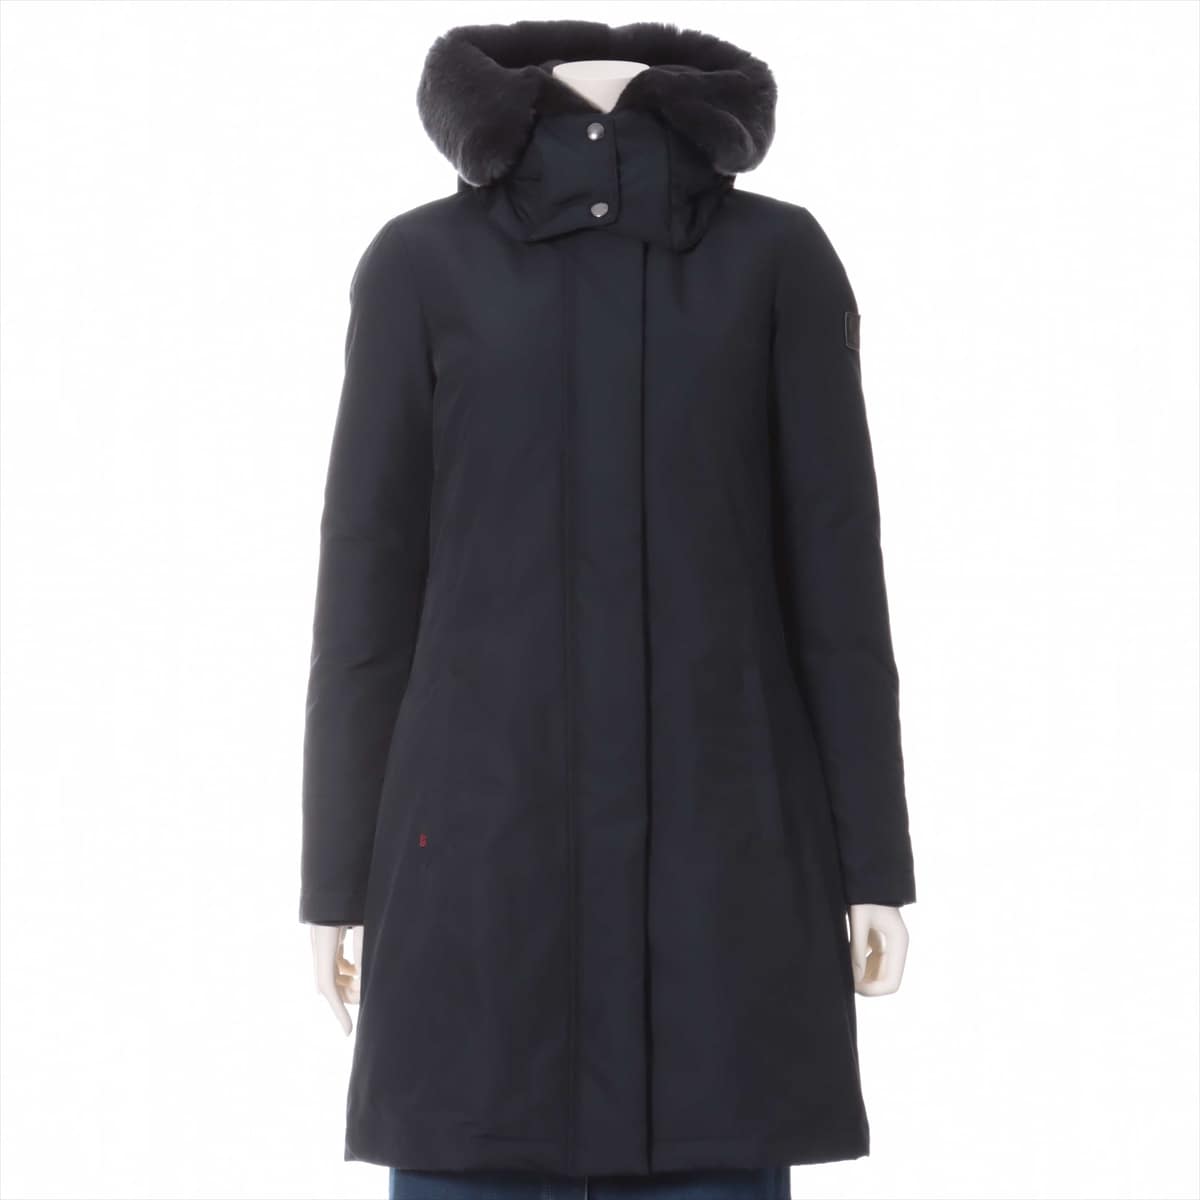 Woolrich Cotton & nylon Down coat XS Ladies' Navy blue  BOW BRIDGE COAT rabbit with fur Stained